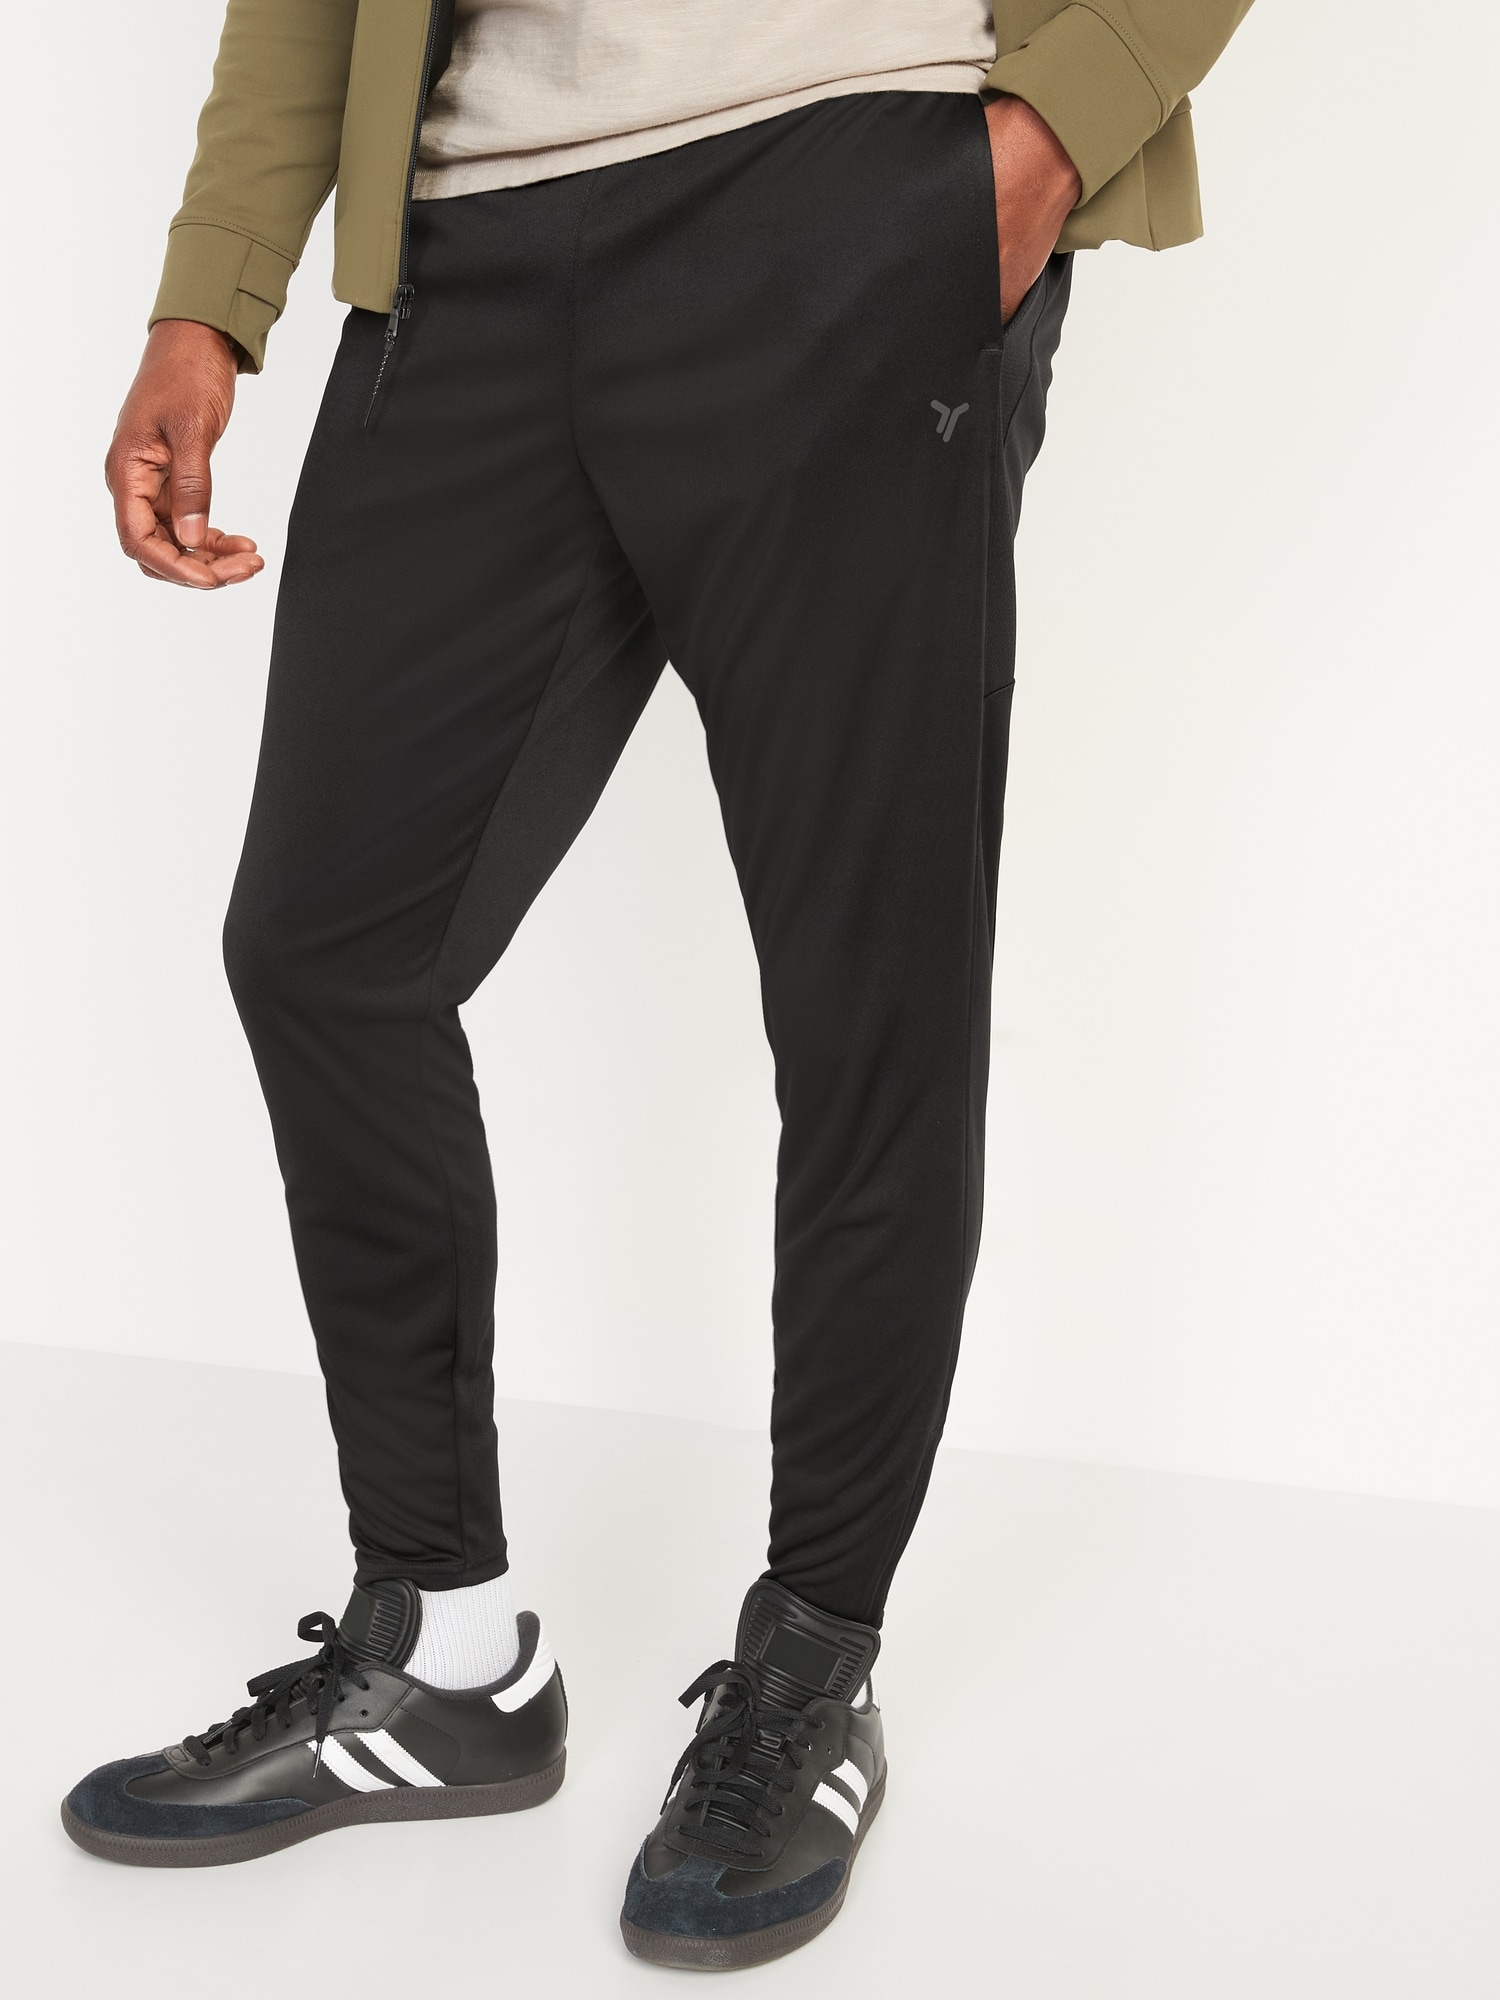 Go-Dry Ankle-Zip Track Pants | Old Navy